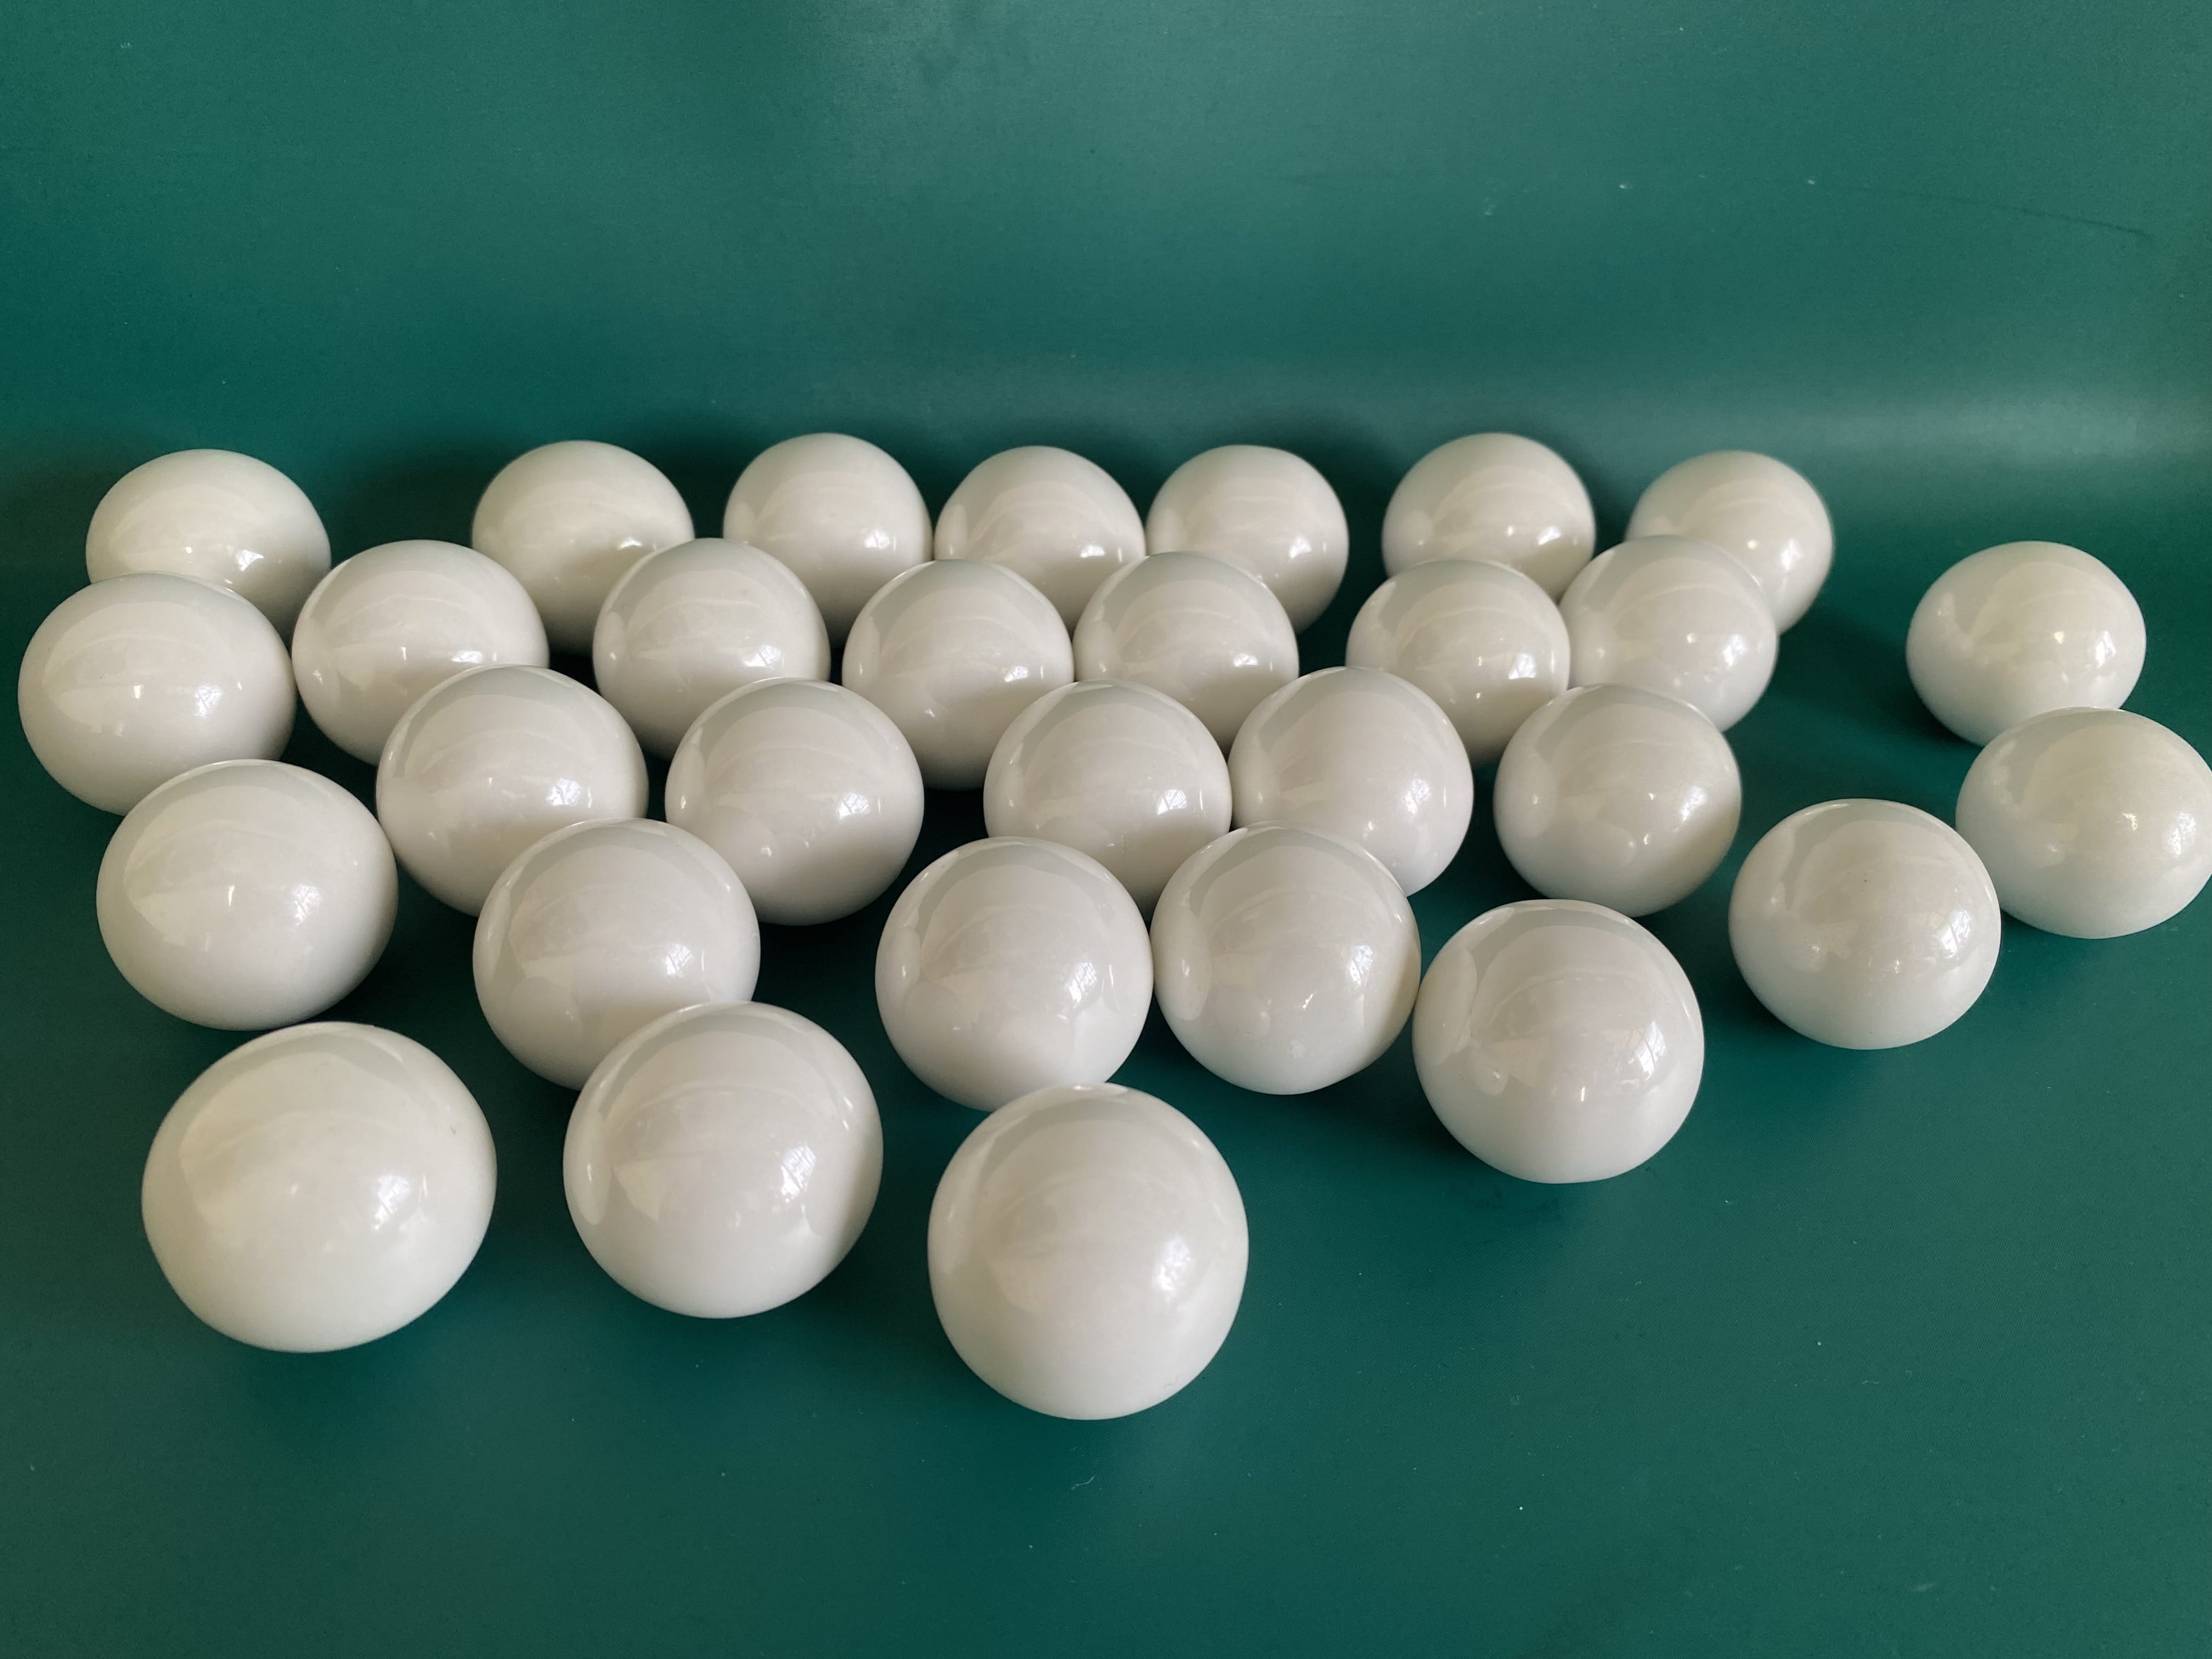 Ceramic Milling Ball, Grinding Ball for Lab or Industry Grinding and Dispersing